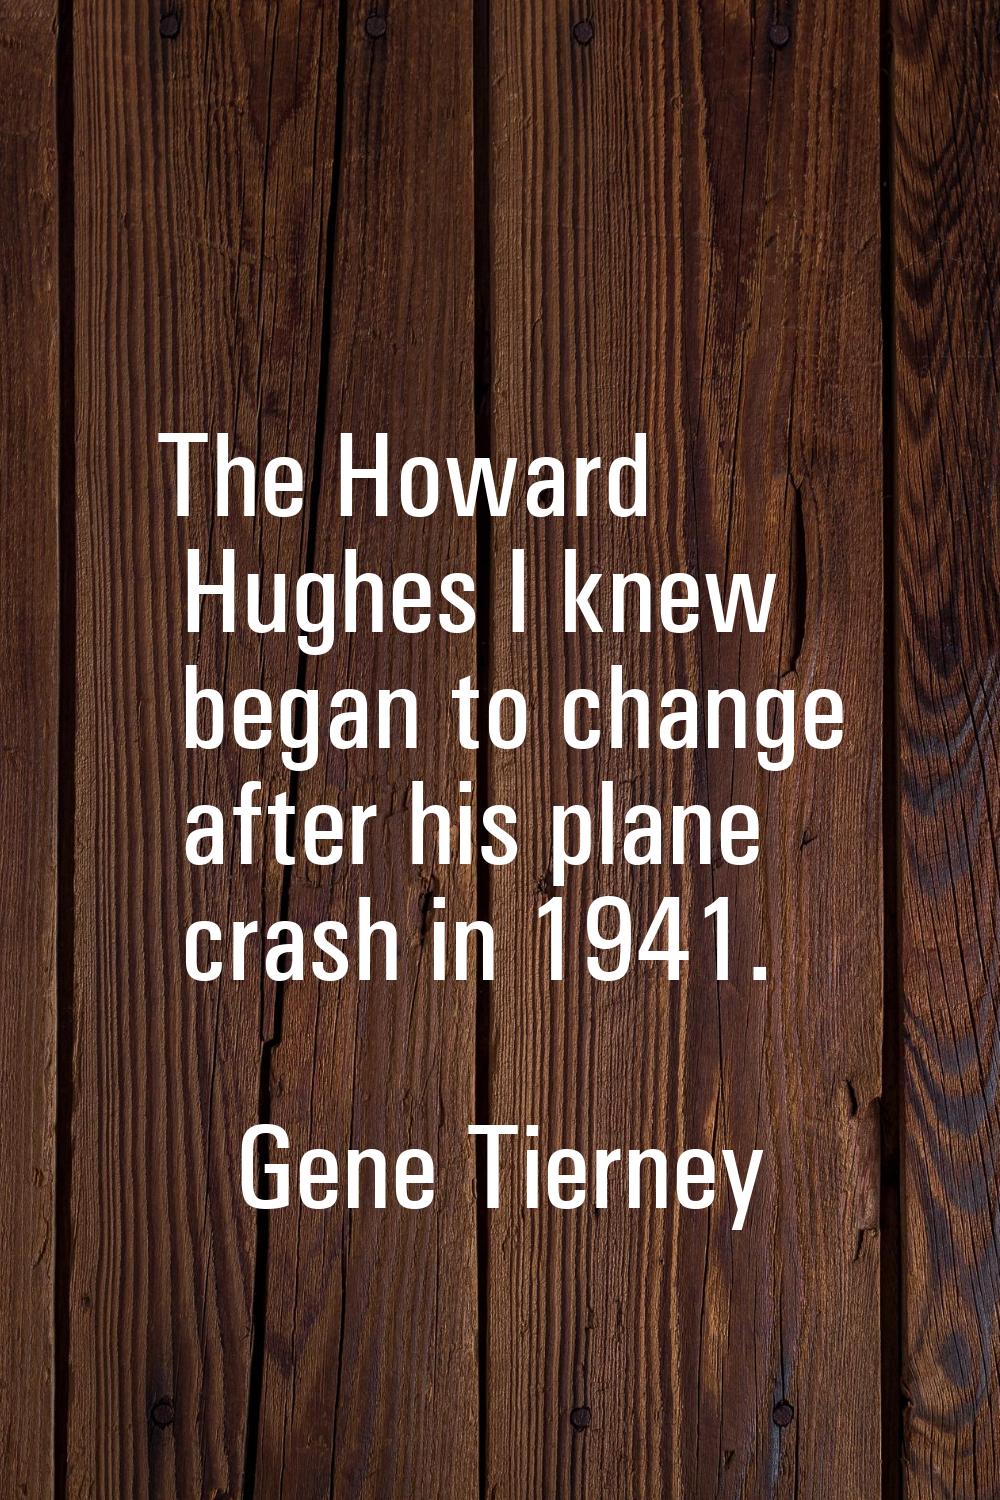 The Howard Hughes I knew began to change after his plane crash in 1941.